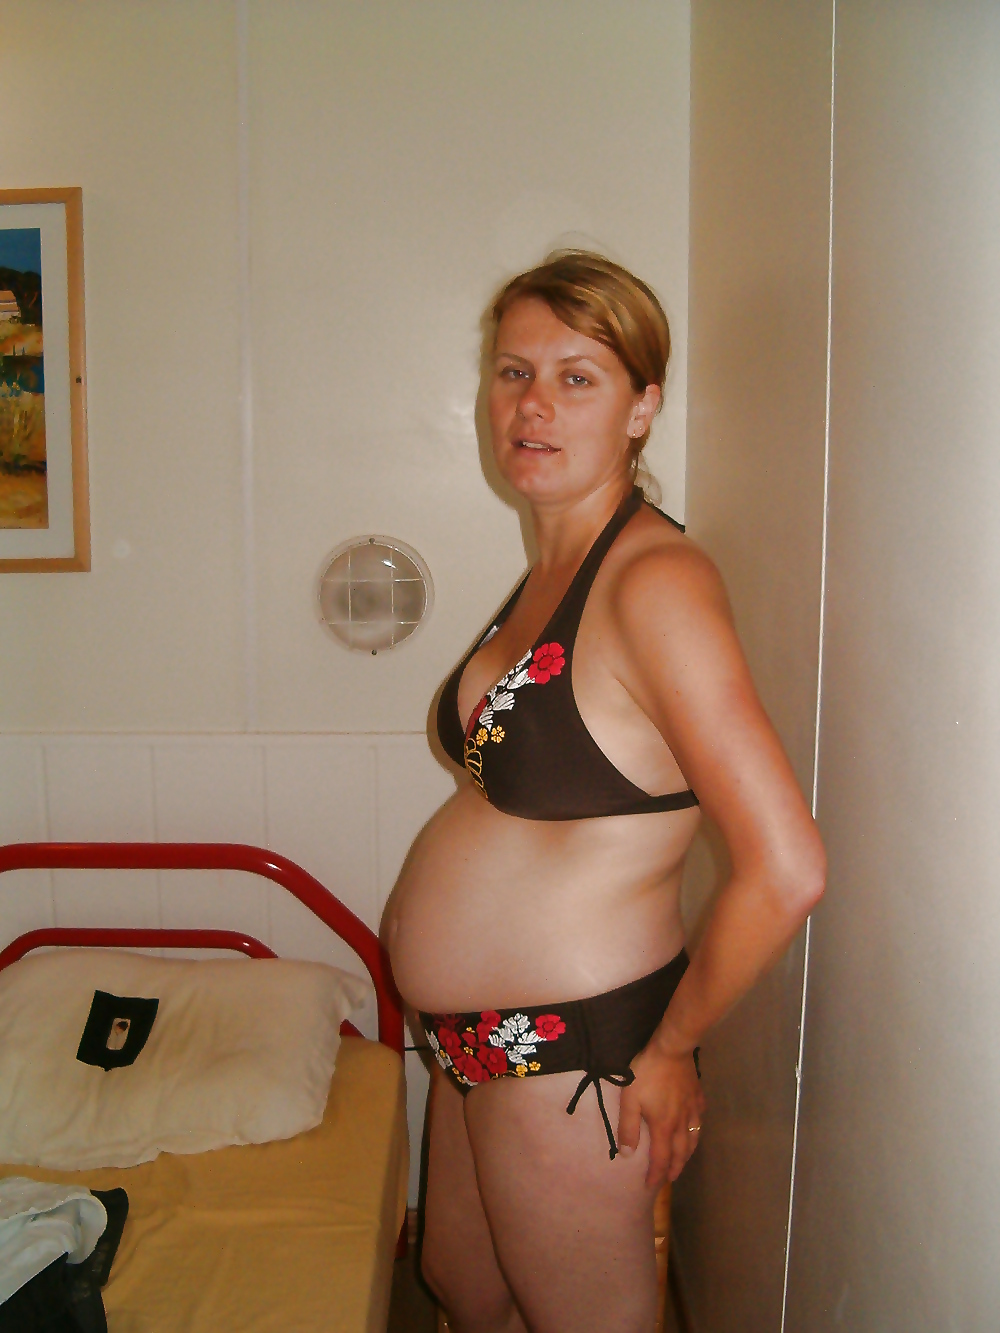 Pregnant mature bitch. How would you fuck her?